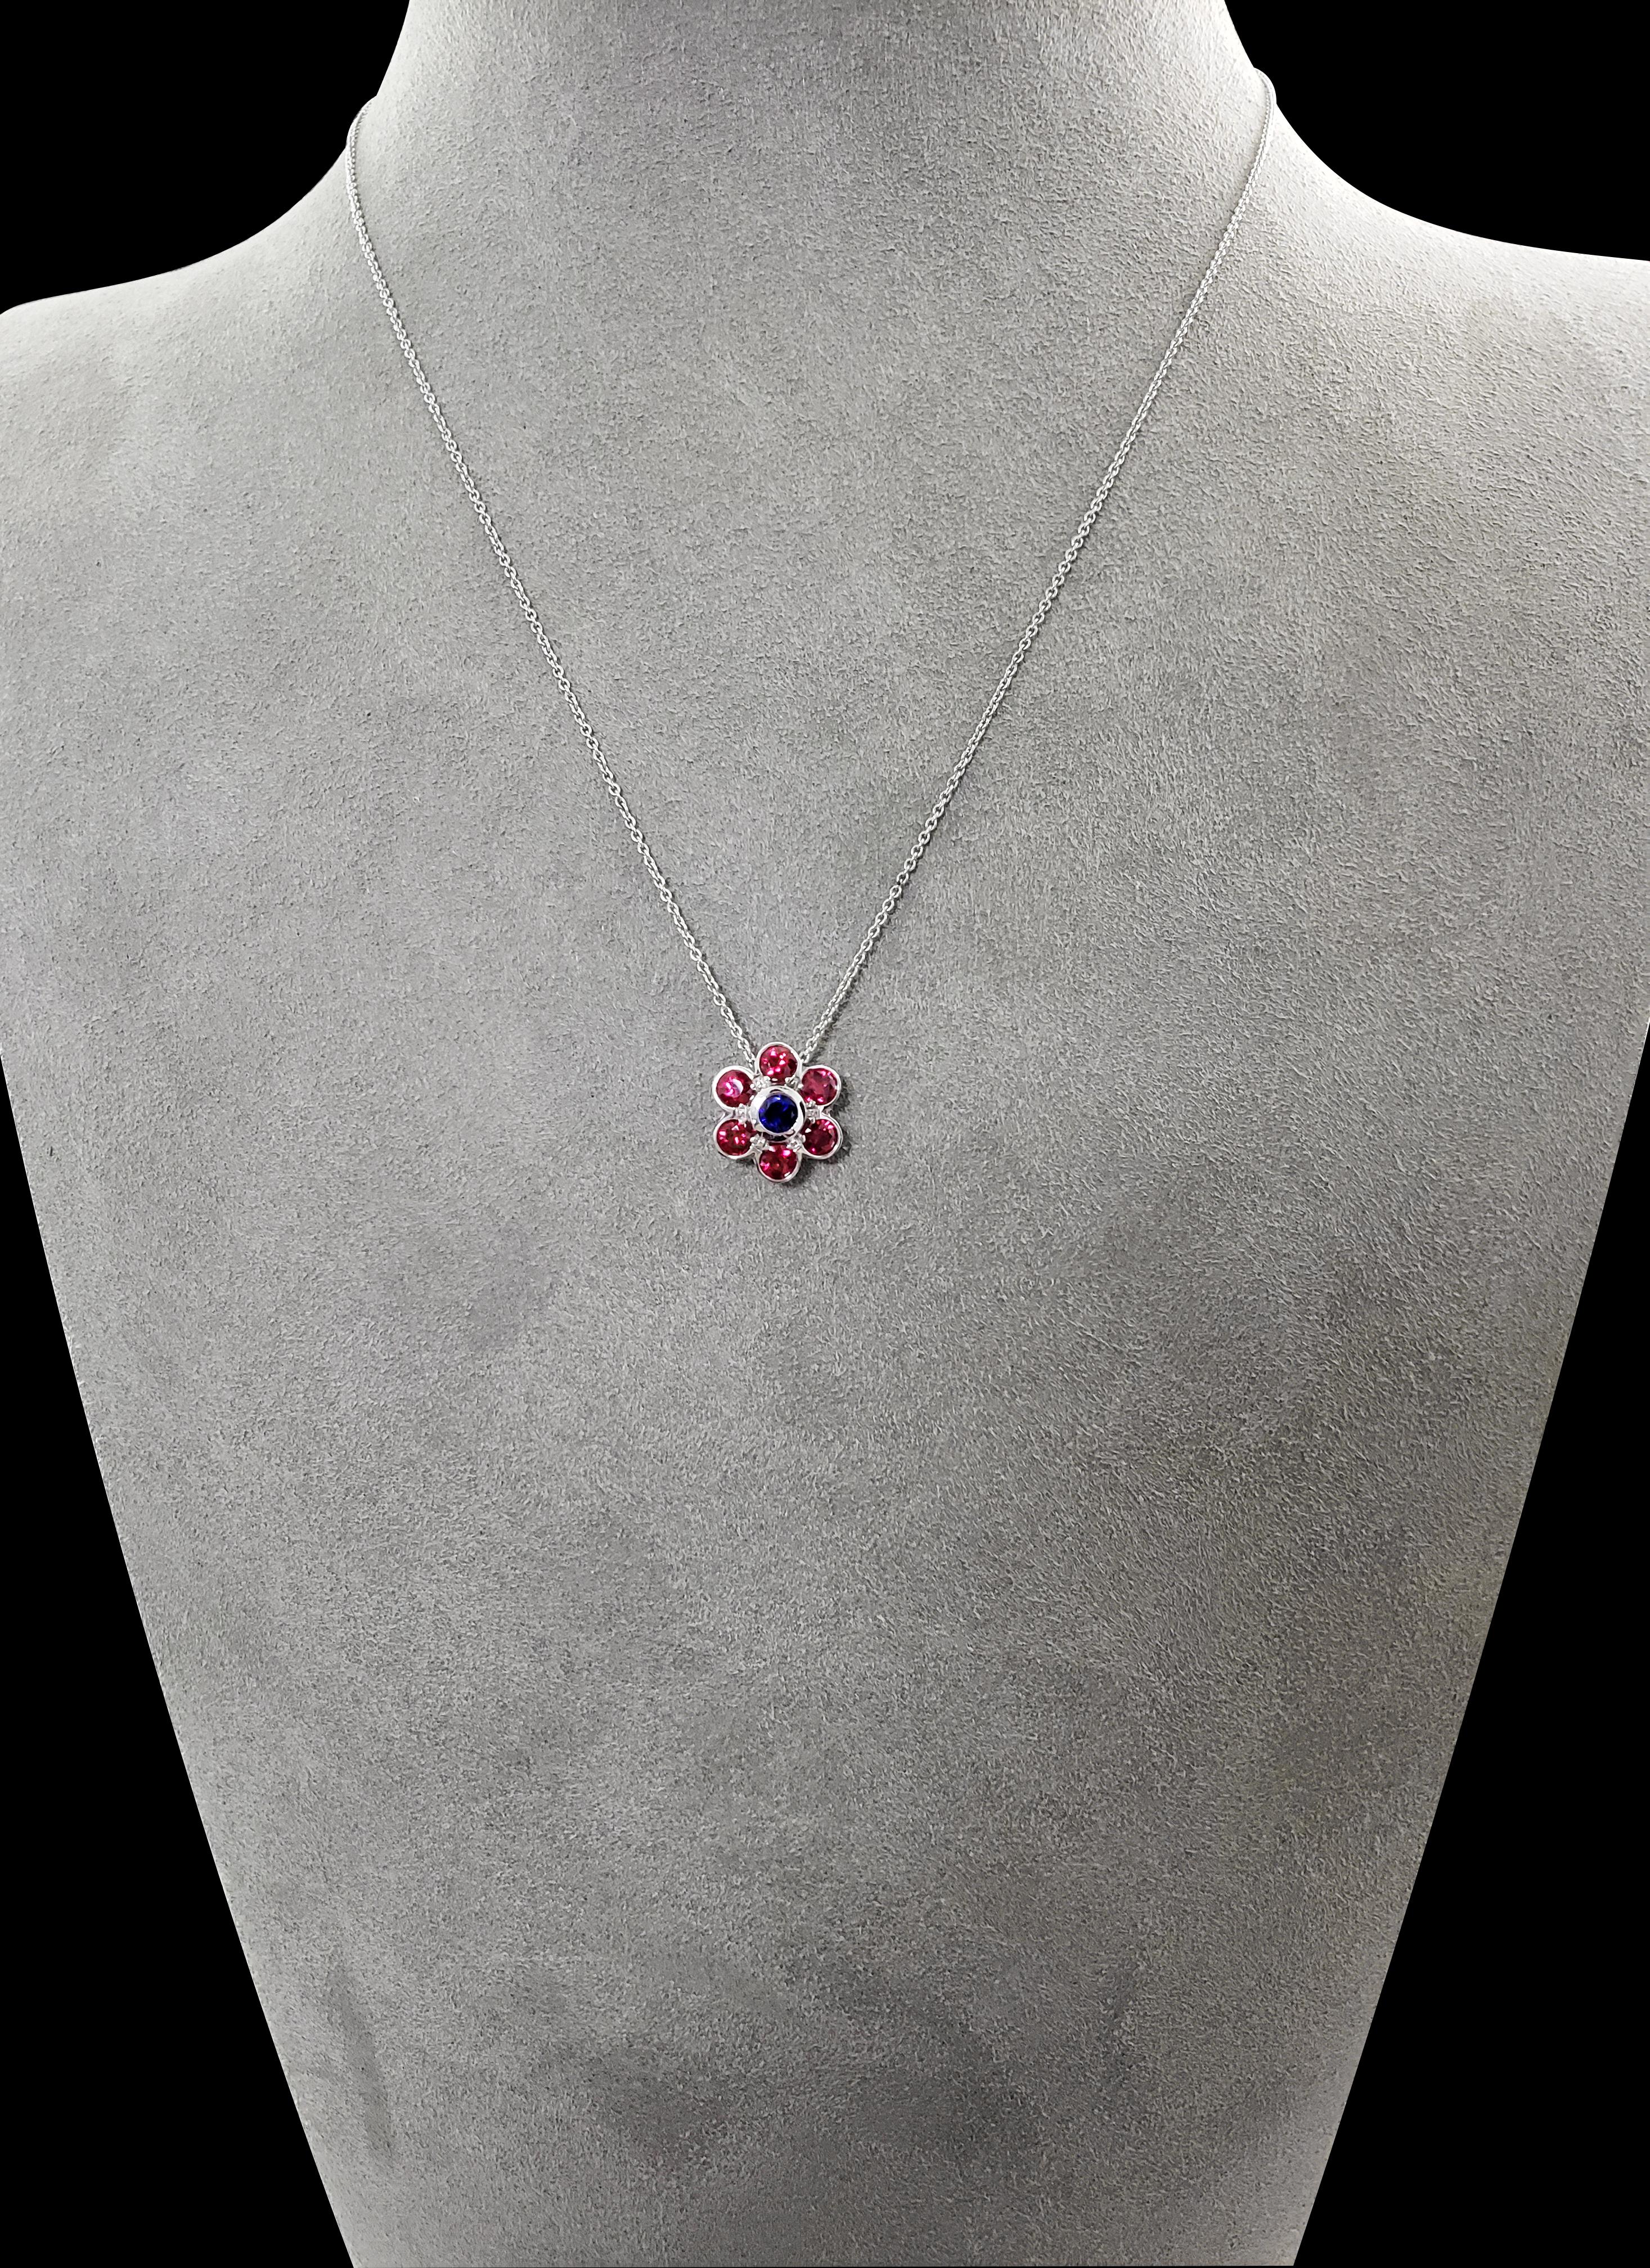 A colorful pendant necklace suitable for a casual and everyday wear. Features a 0.27 carat blue sapphire surrounded by 6 rubies (1.26 carats total) in a floral motif. Each gemstone is bezel set in 18 karat white gold. Attached to a 16 inch white